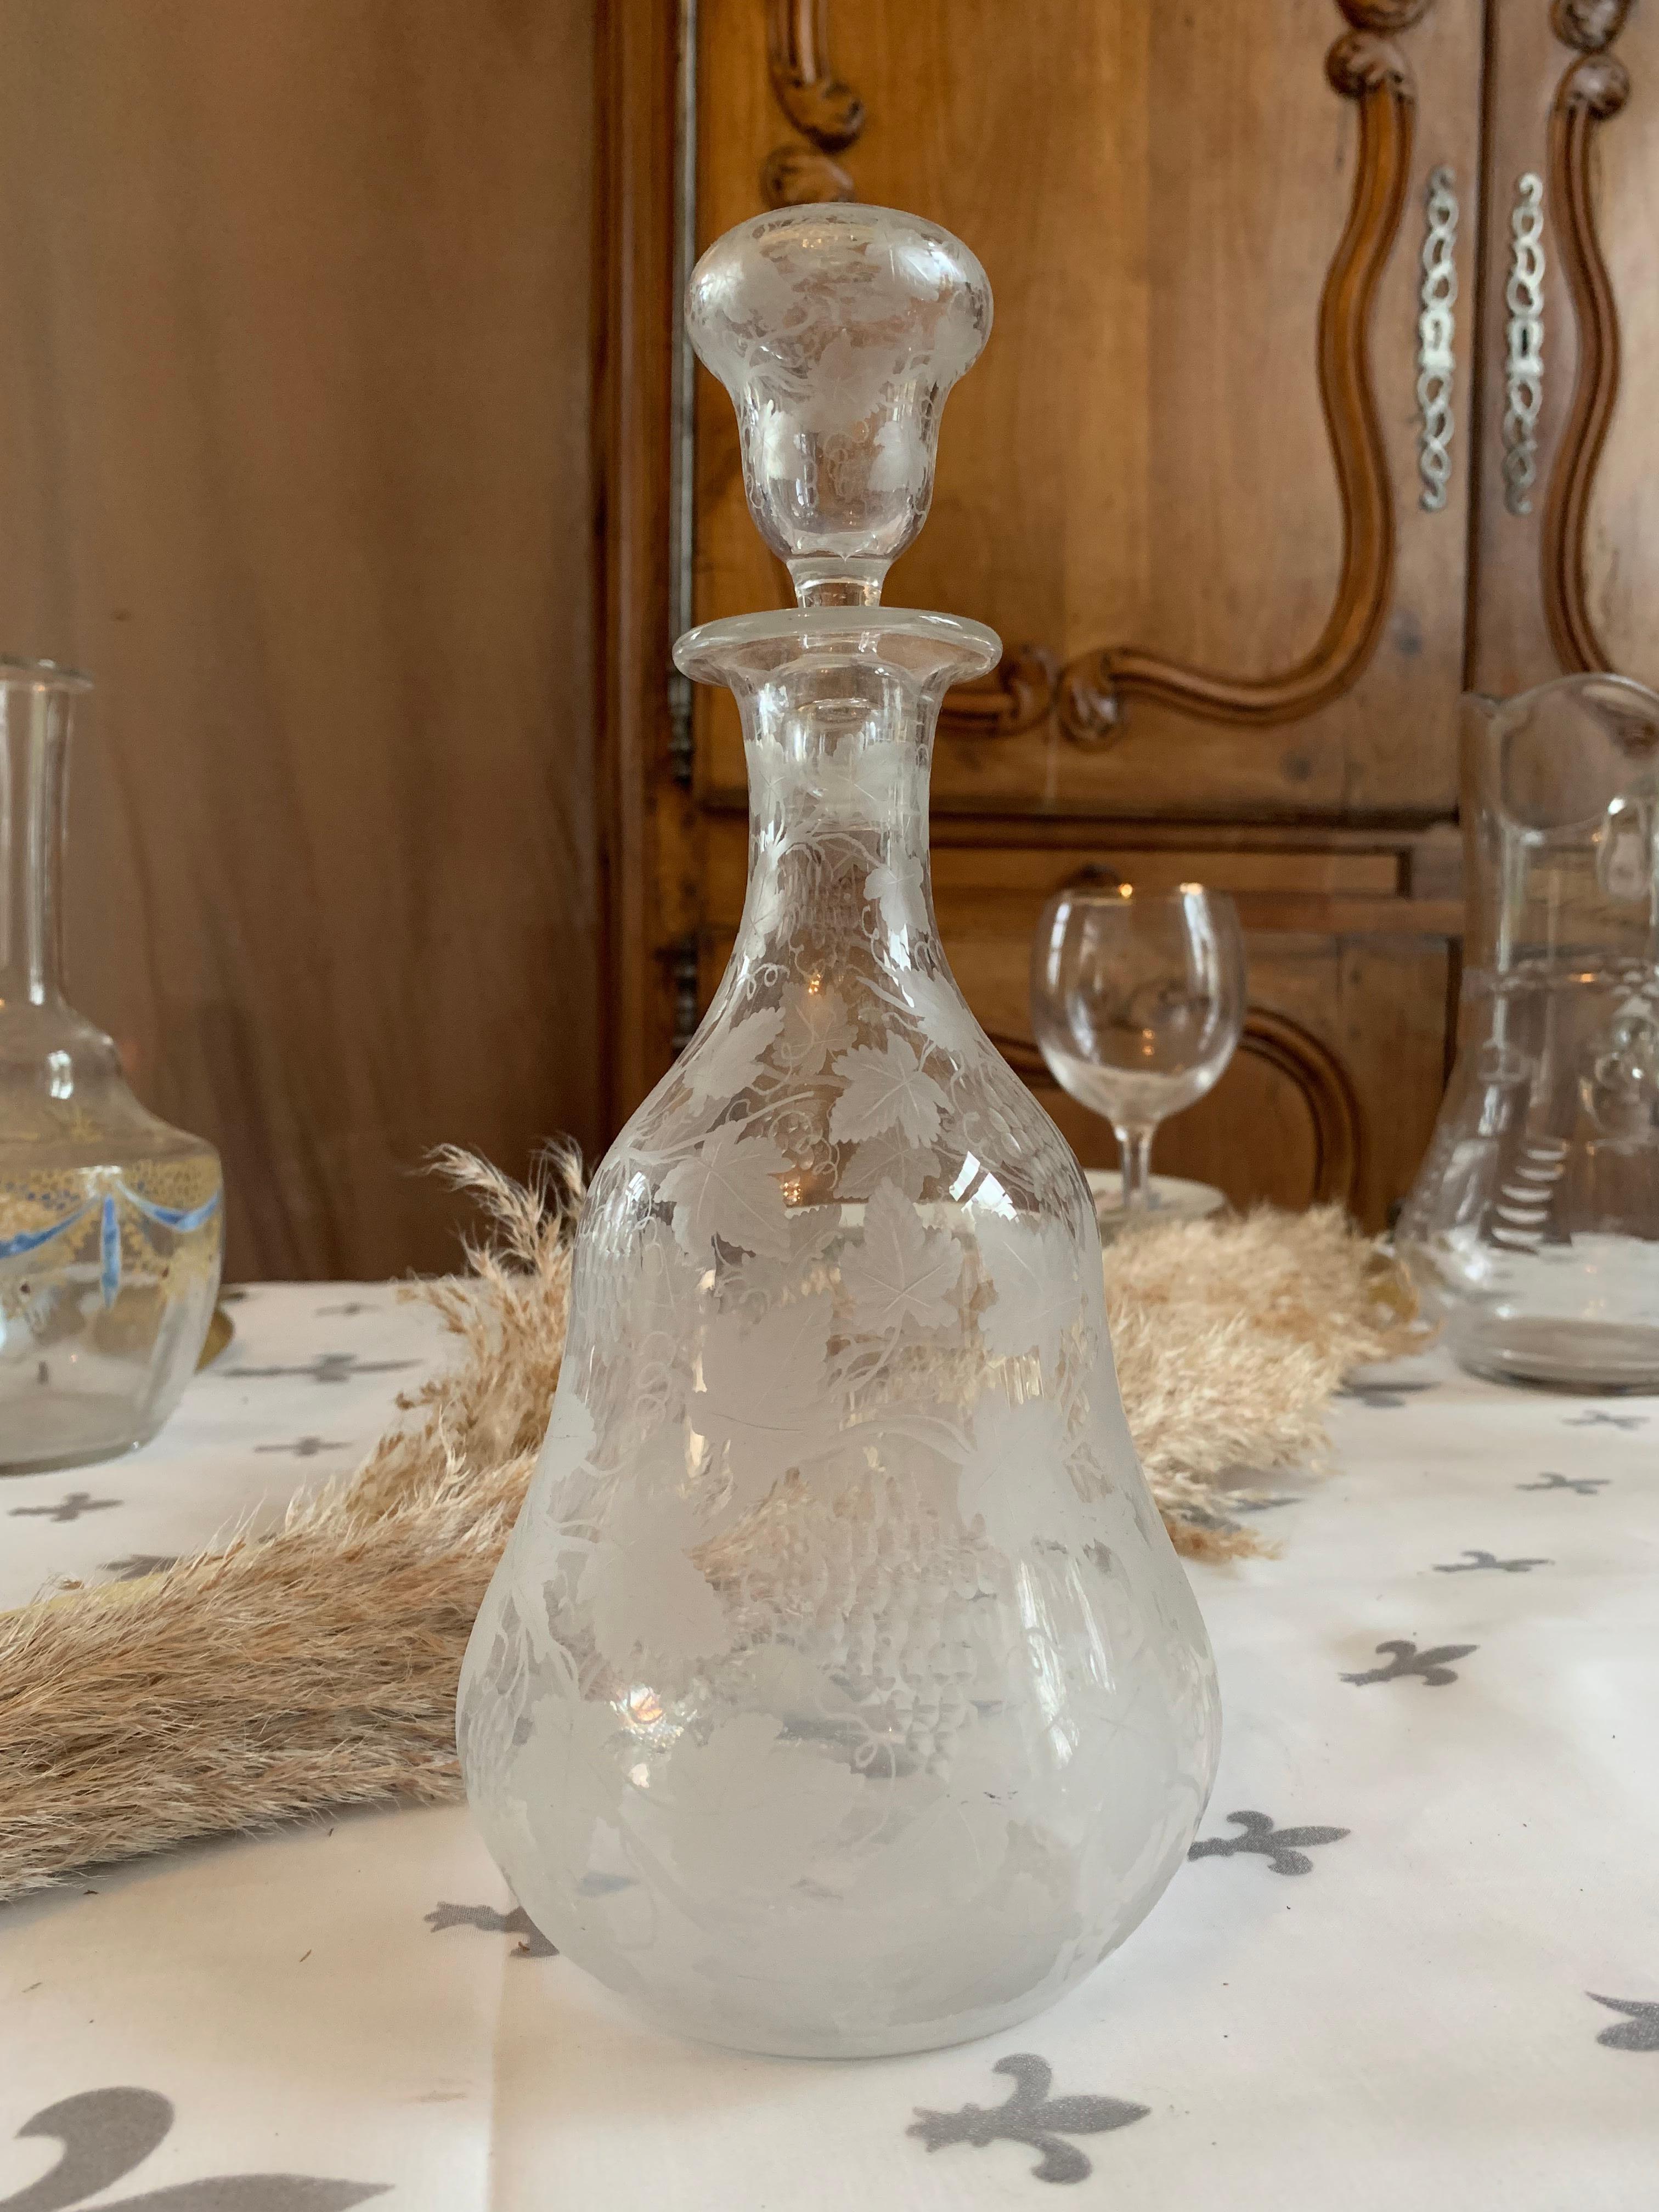  Crystal Decanter With Vine Decor Late 19th Century For Sale 5